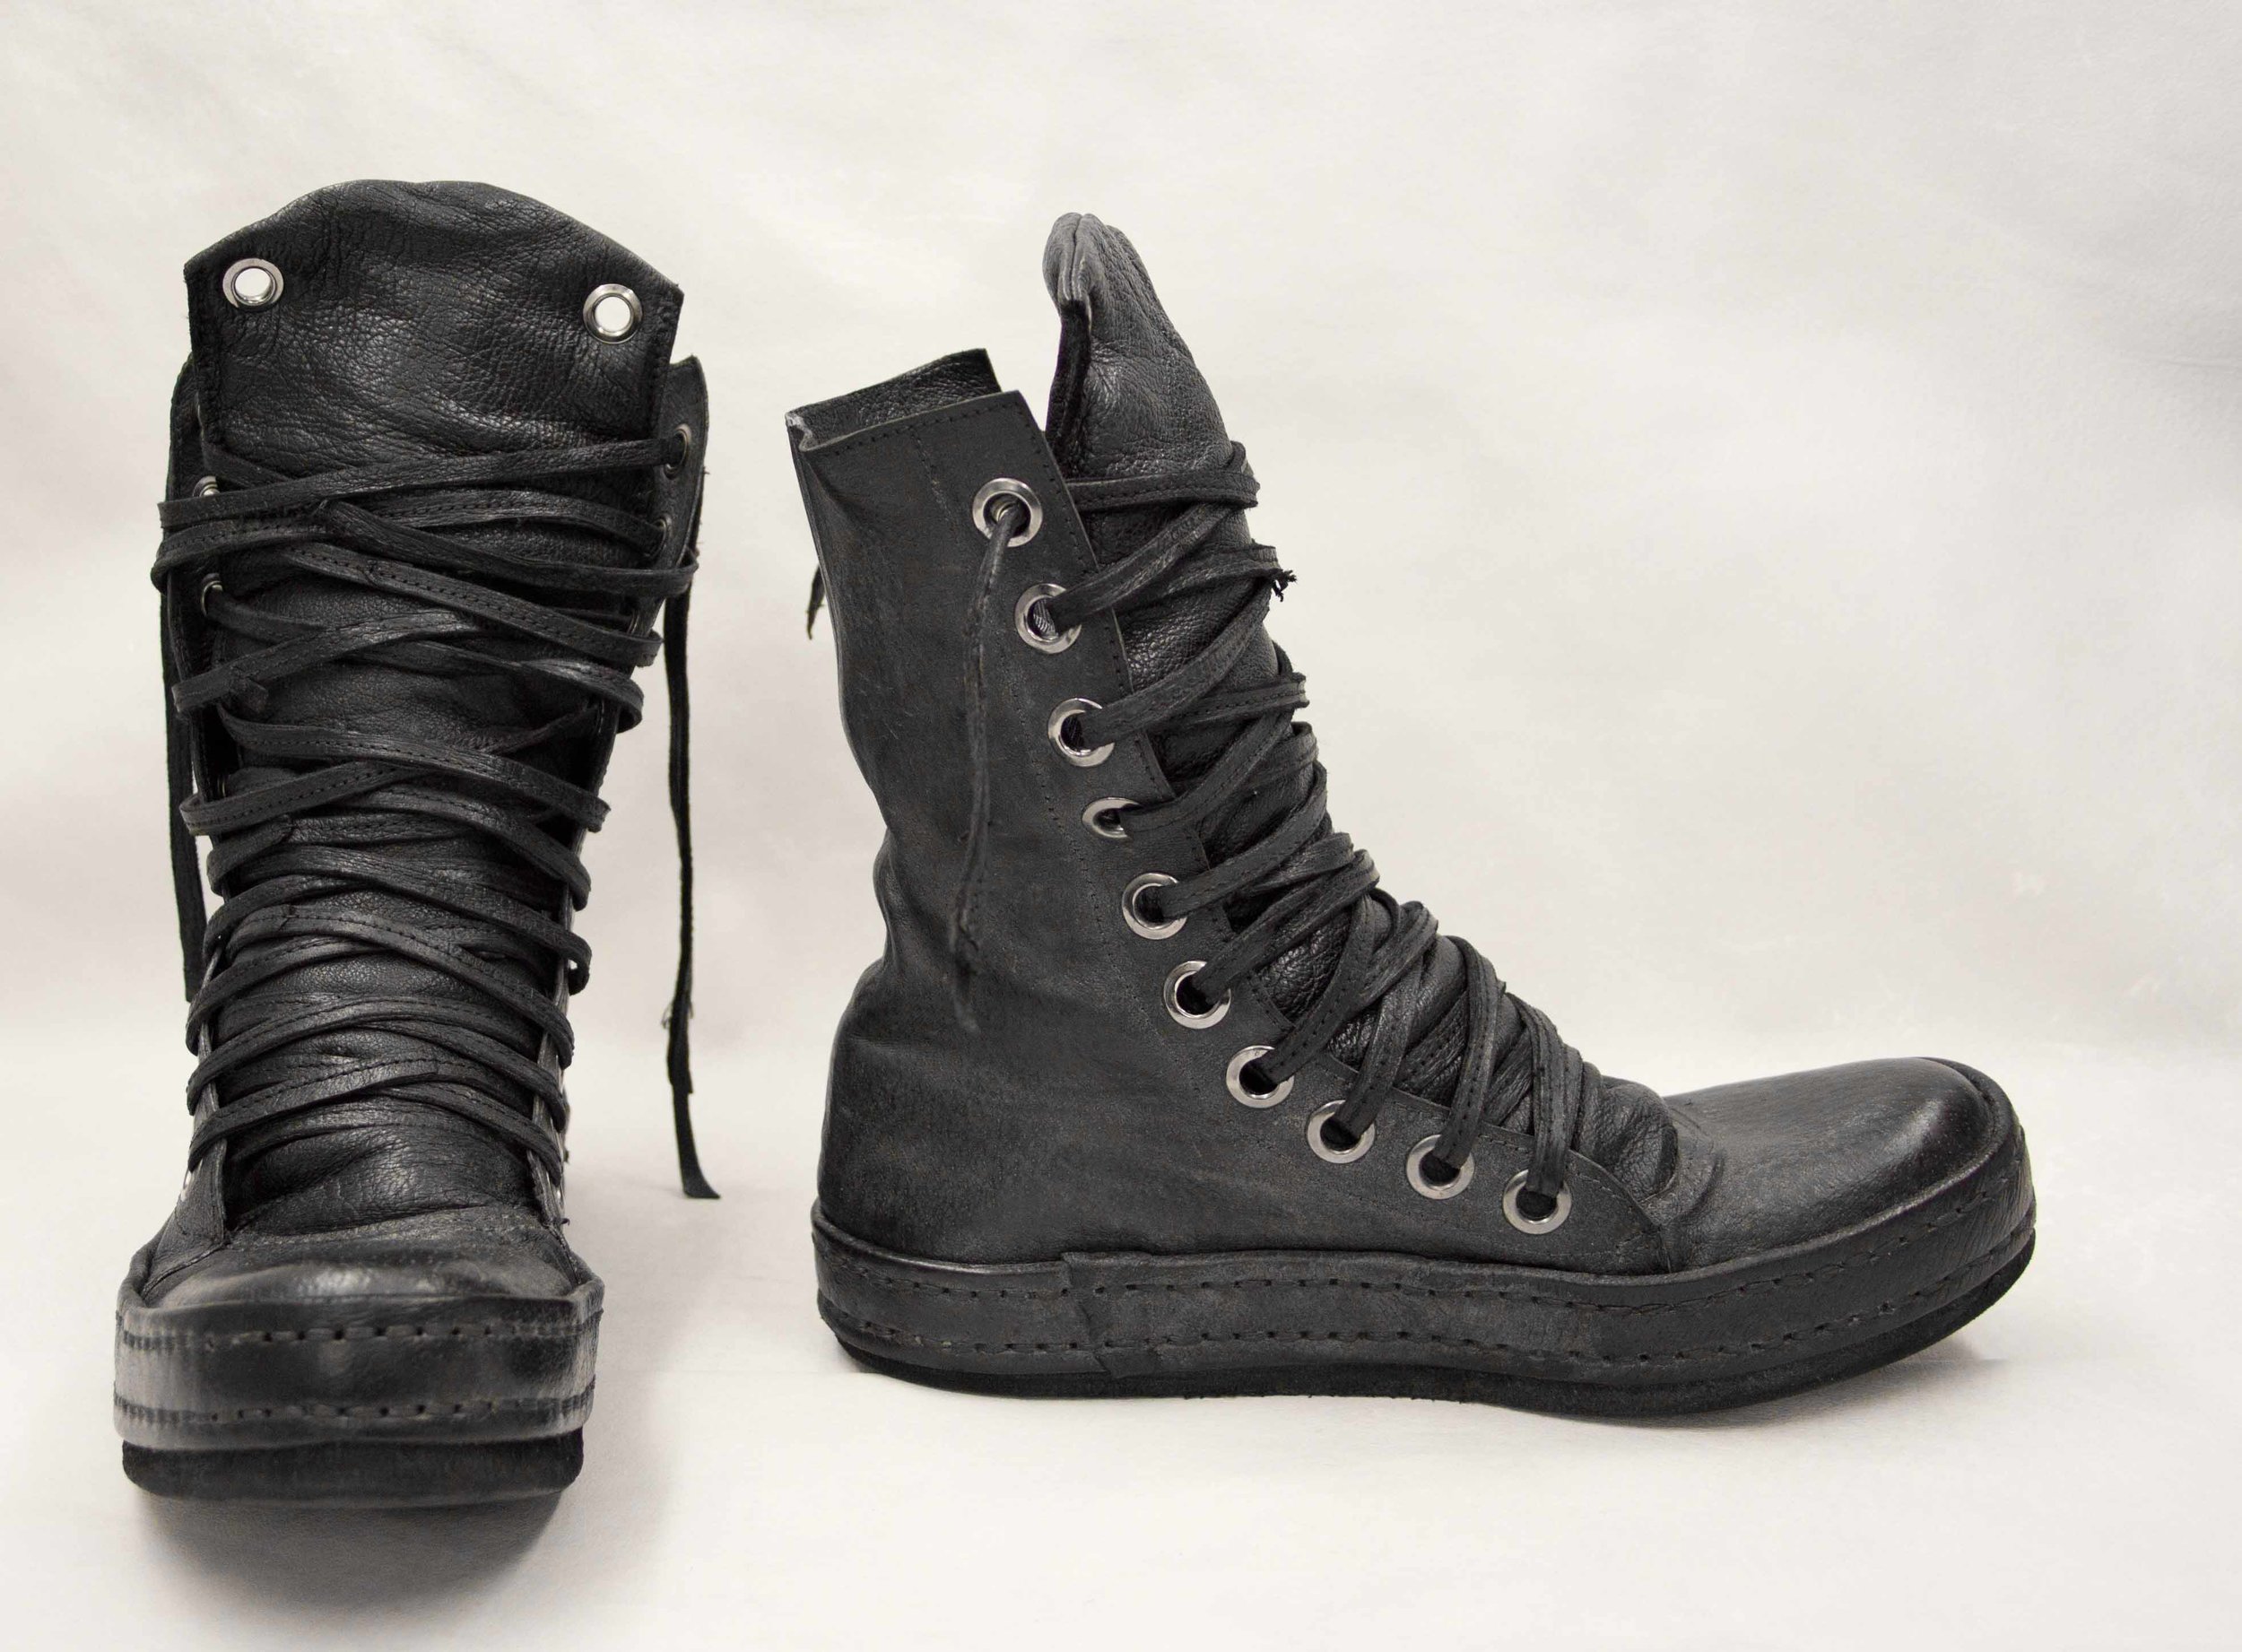 06. Black boots back and side.jpg